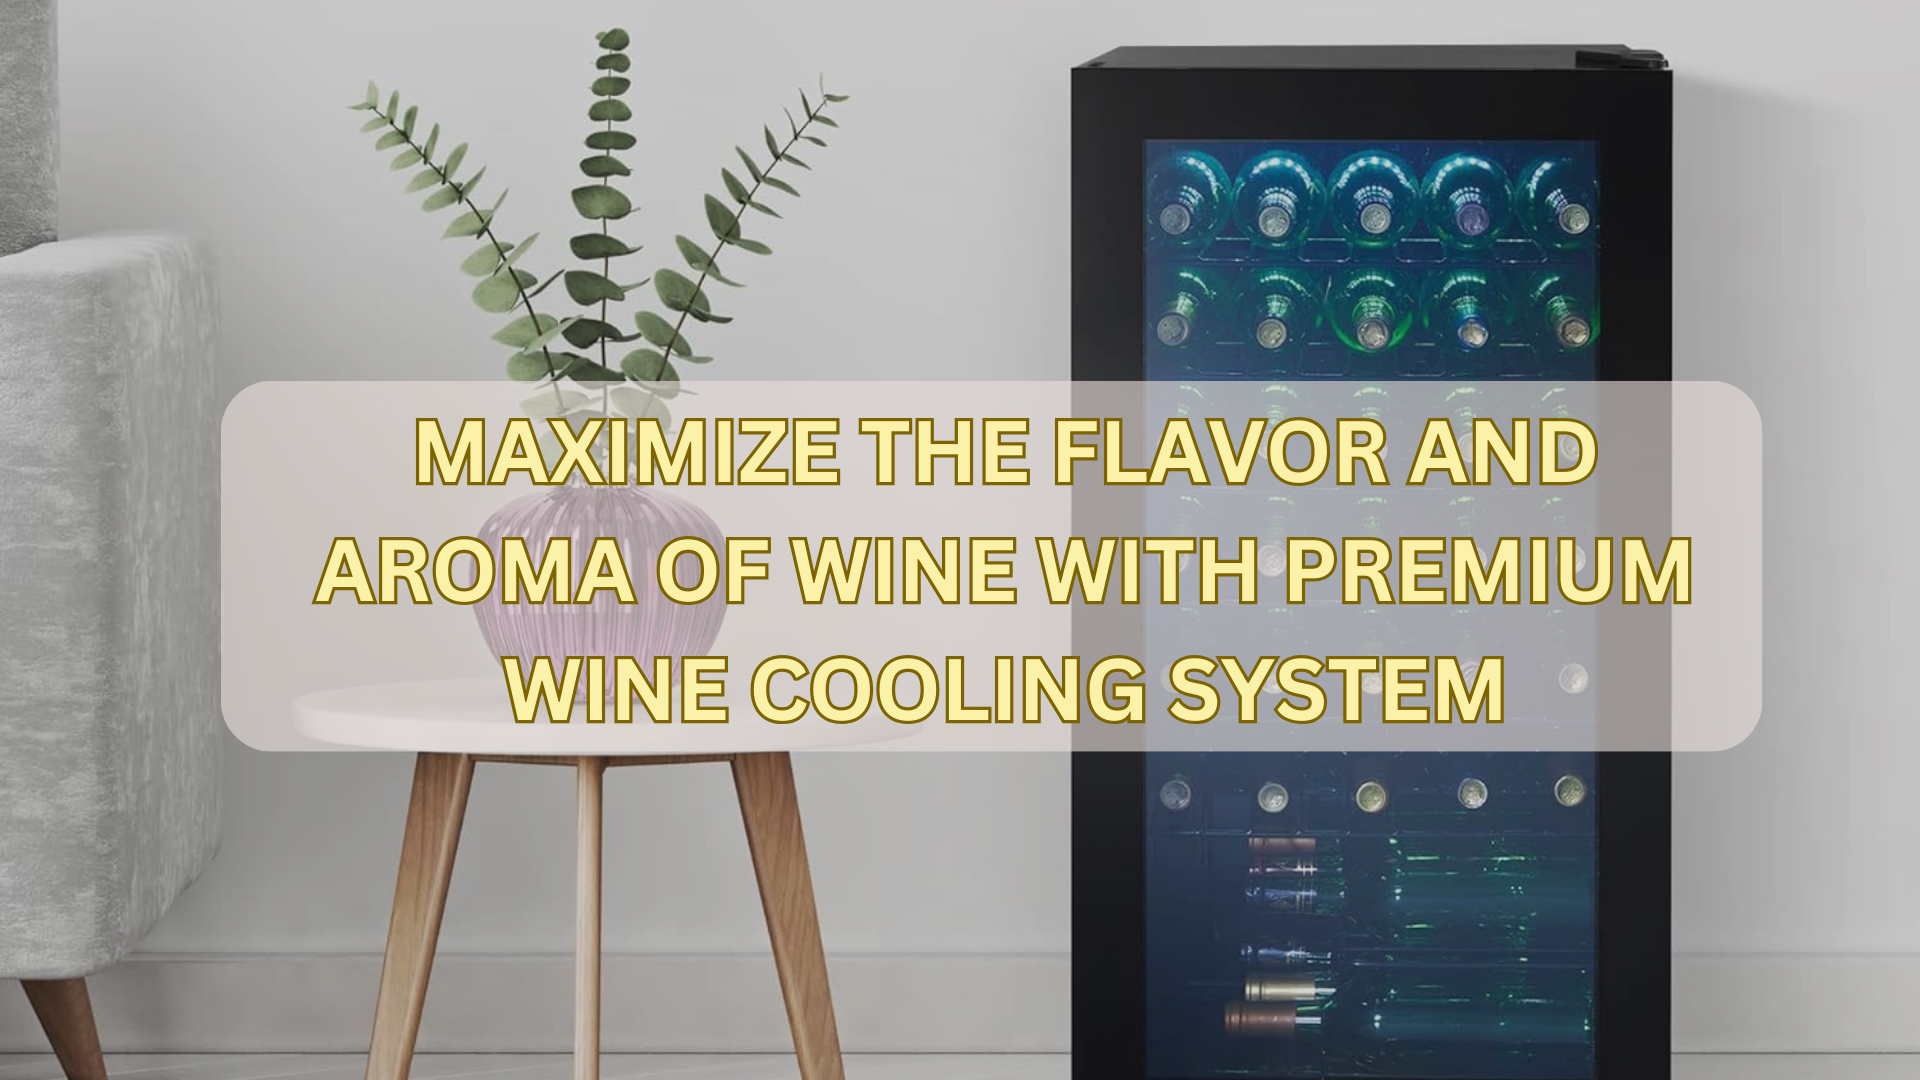 How to Maximize the Flavor and Aroma of Your Wine with a Premium Wine Cooling System